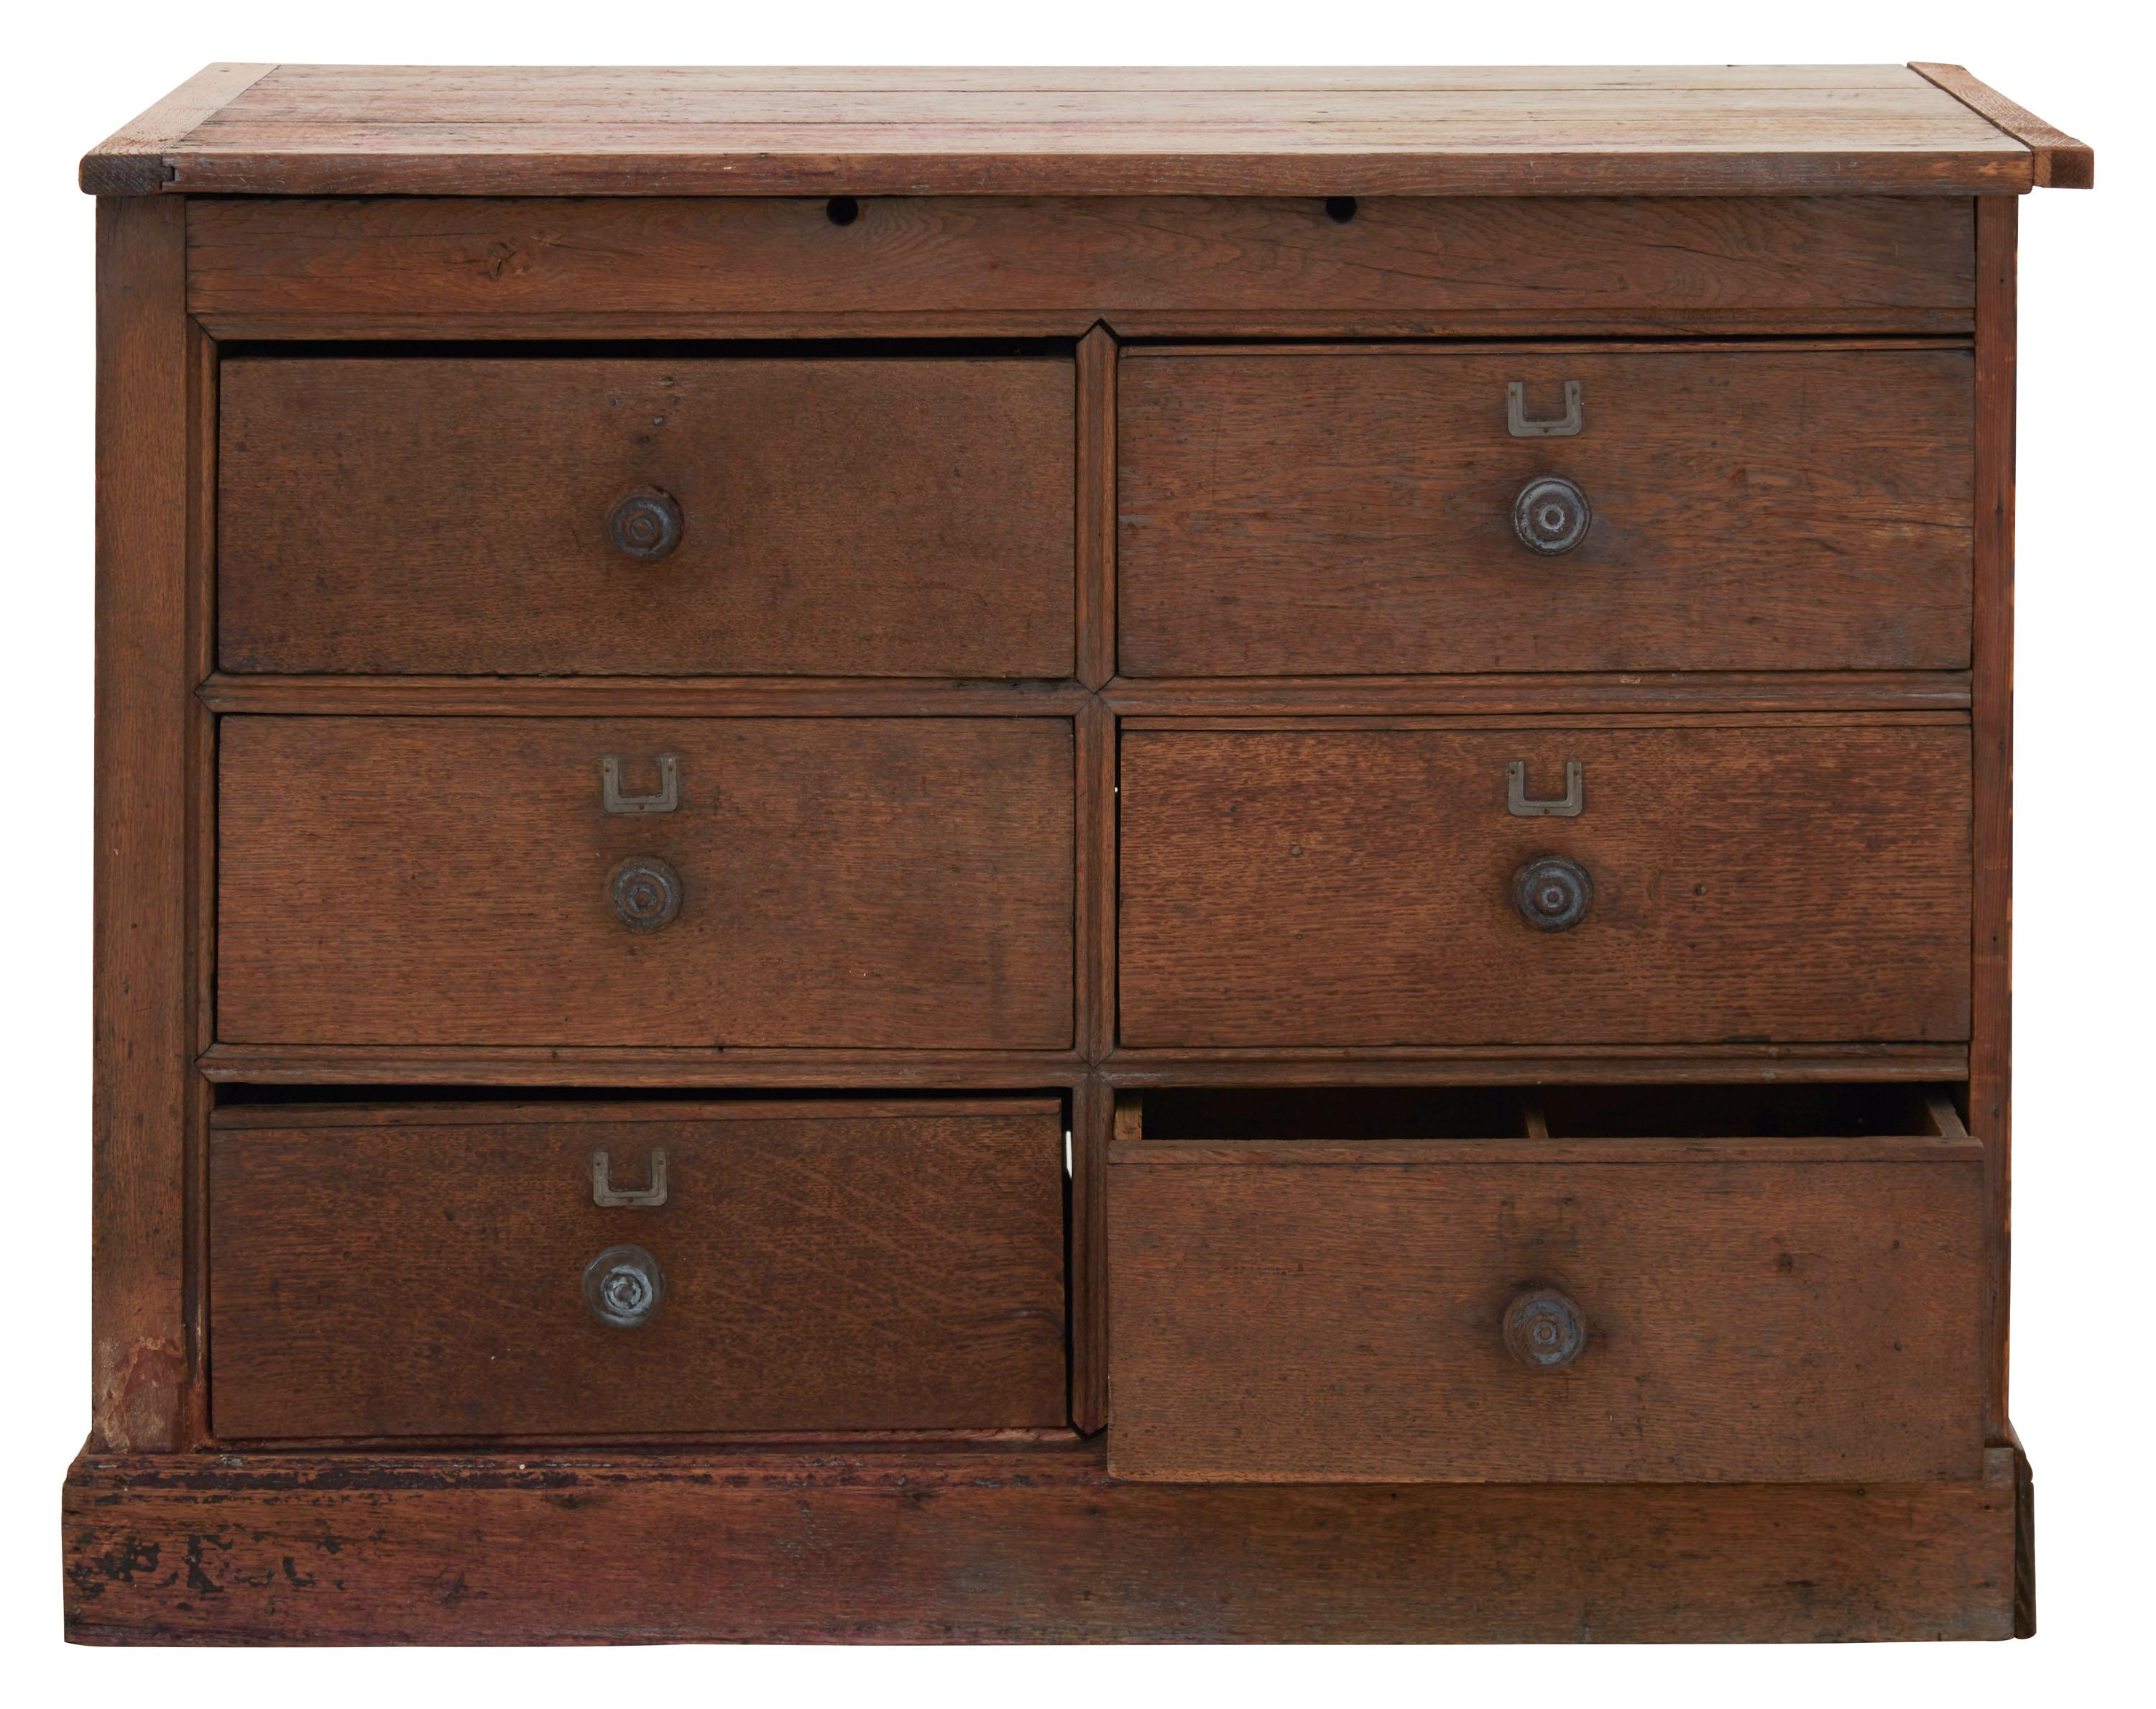 • Patinated wood finish
• Hand turned wood knobs
• Early 20th century
• France
• Measures: 43